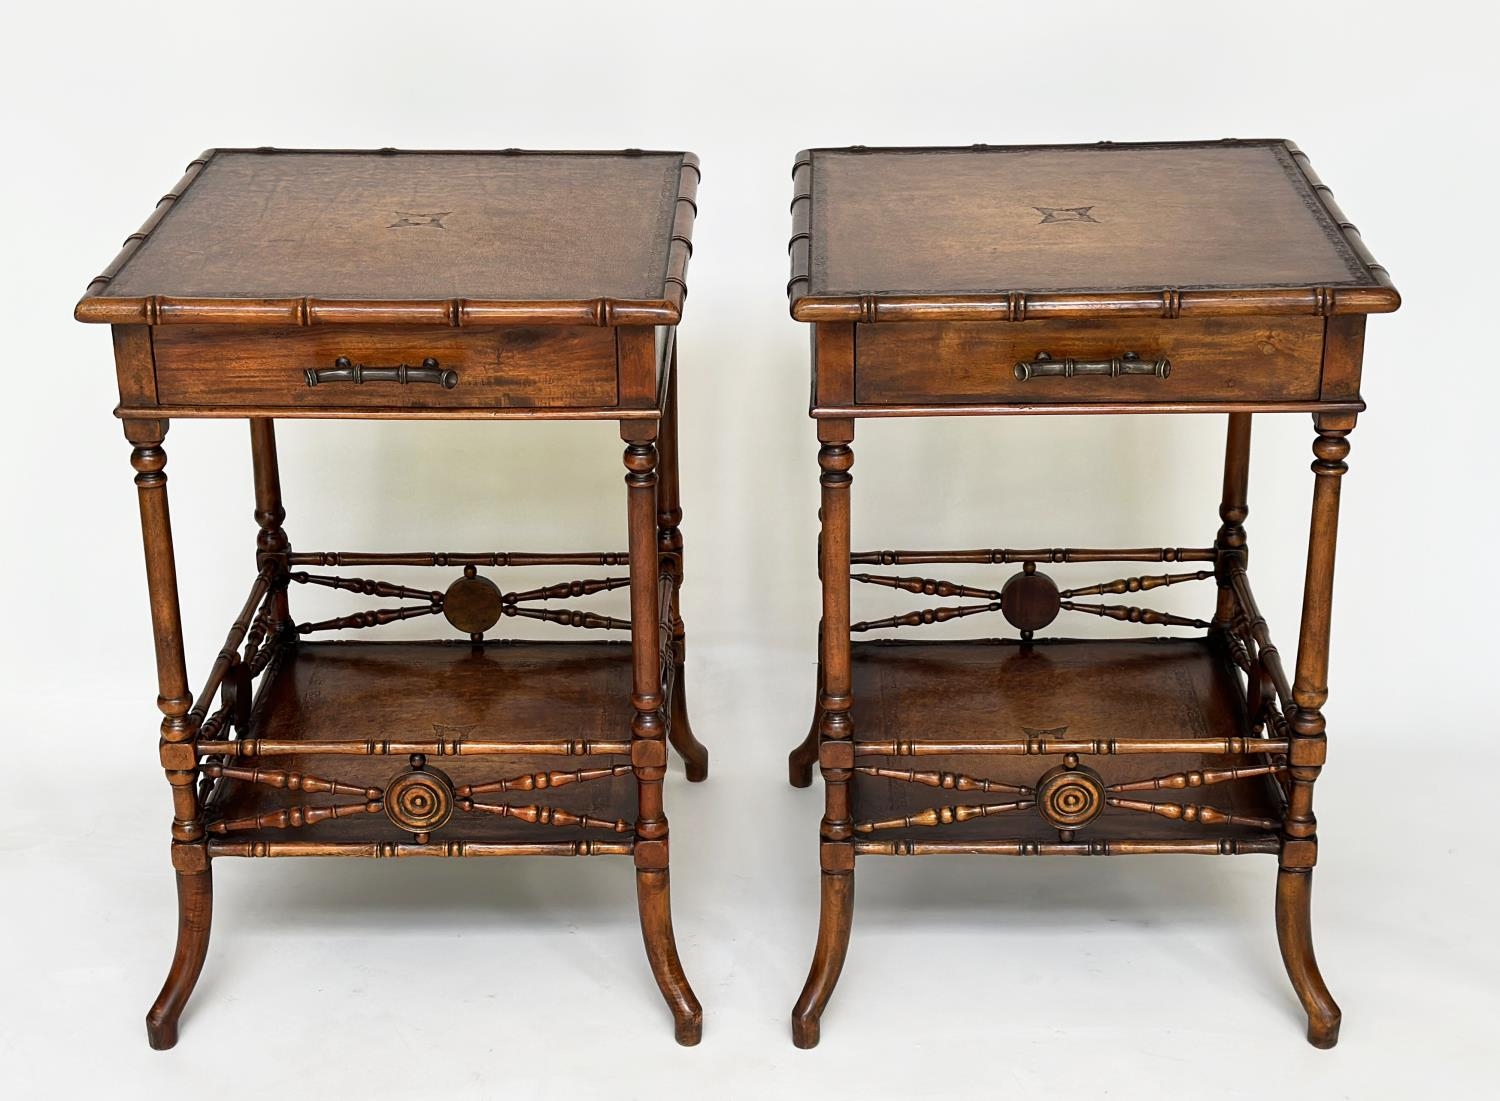 THEODORE ALEXANDER LAMP TABLES, a pair, Regency style, tooled leather faux bamboo and turned